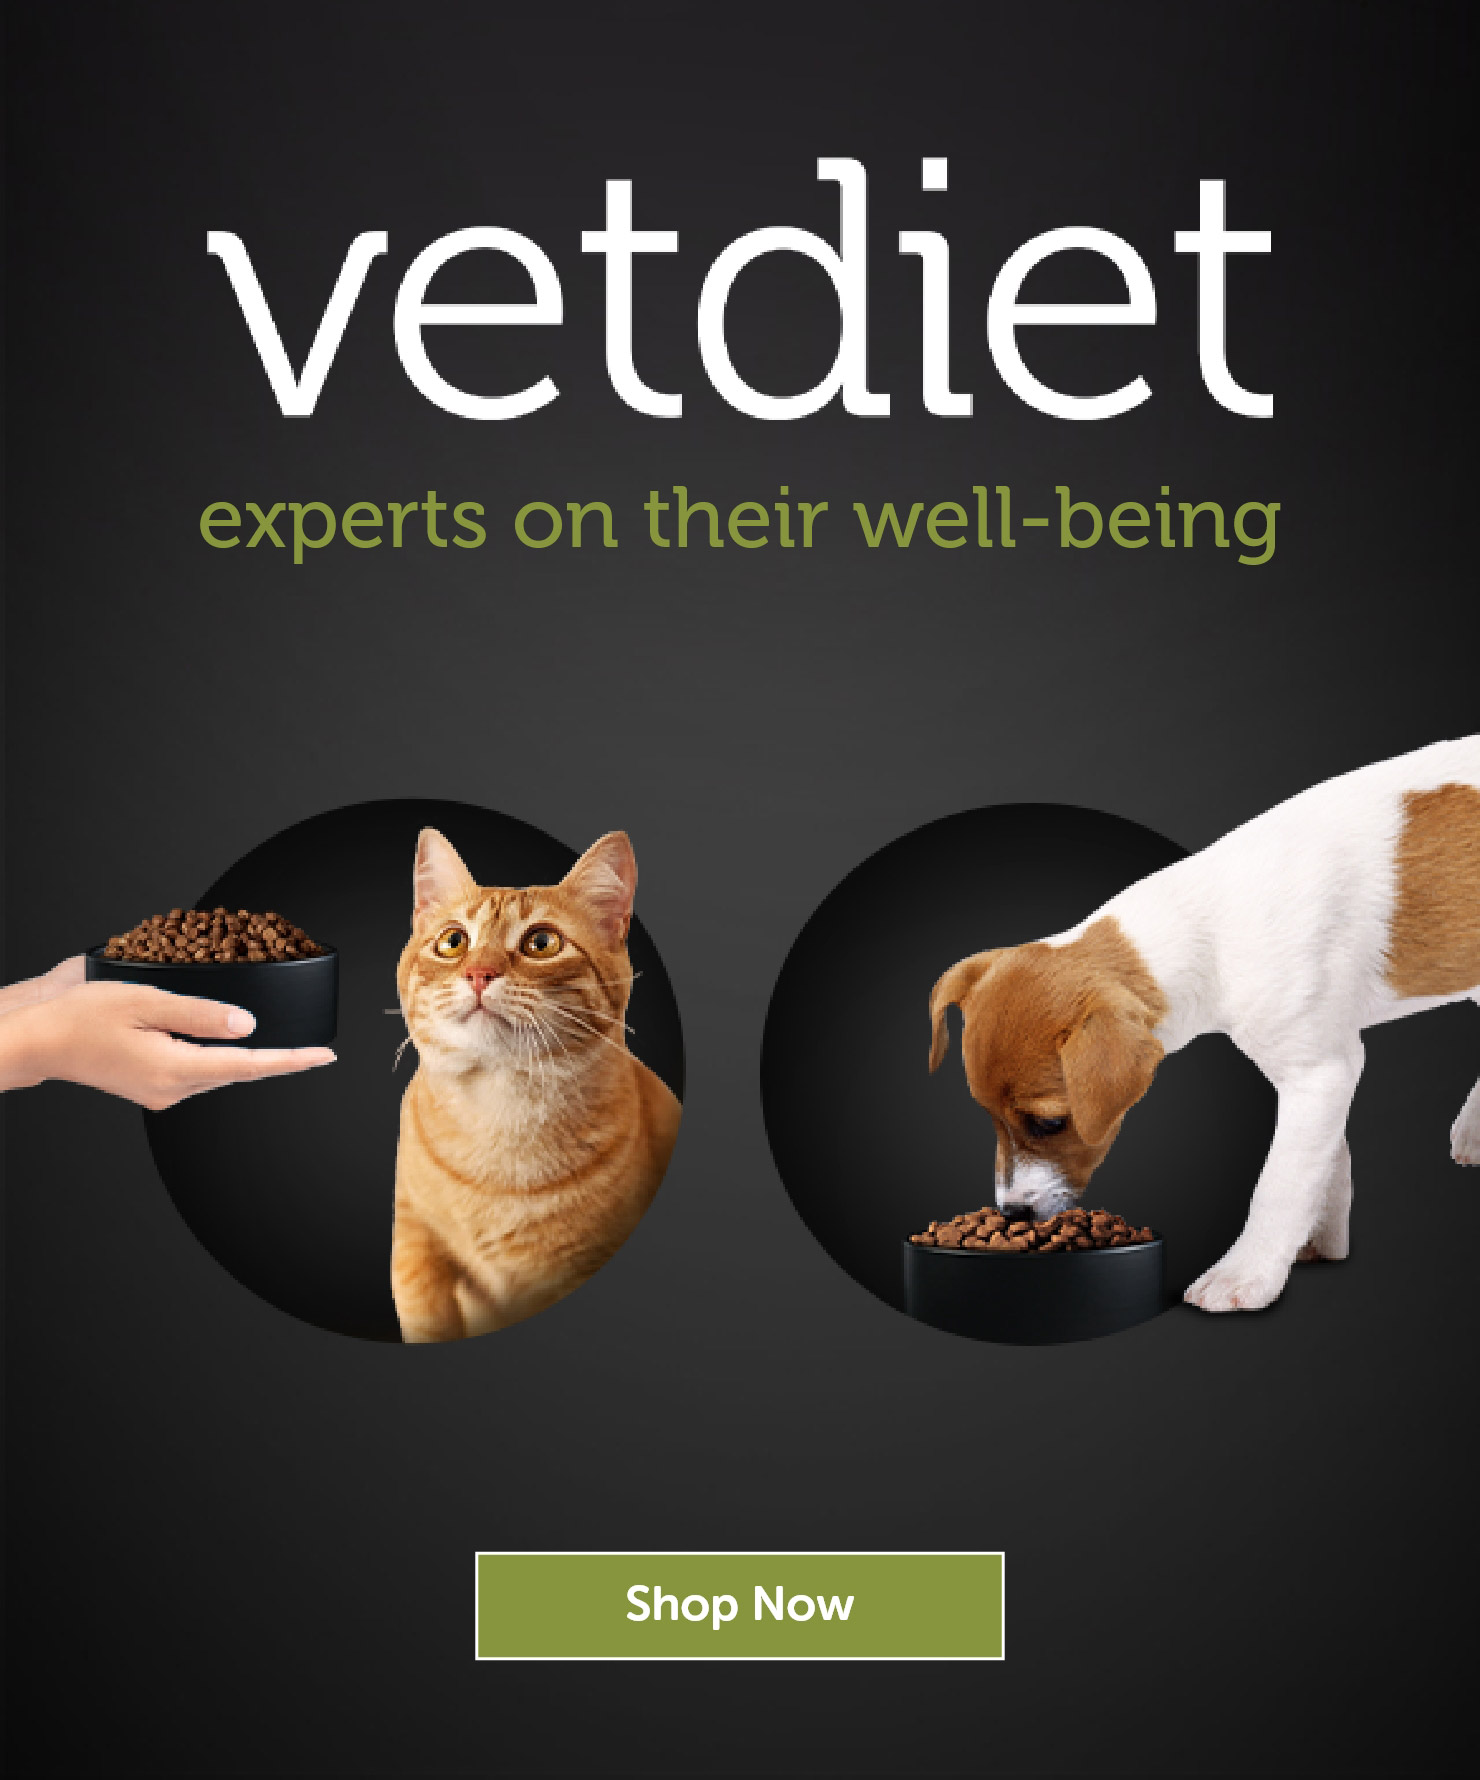 Vetdiet: experts on their well-being